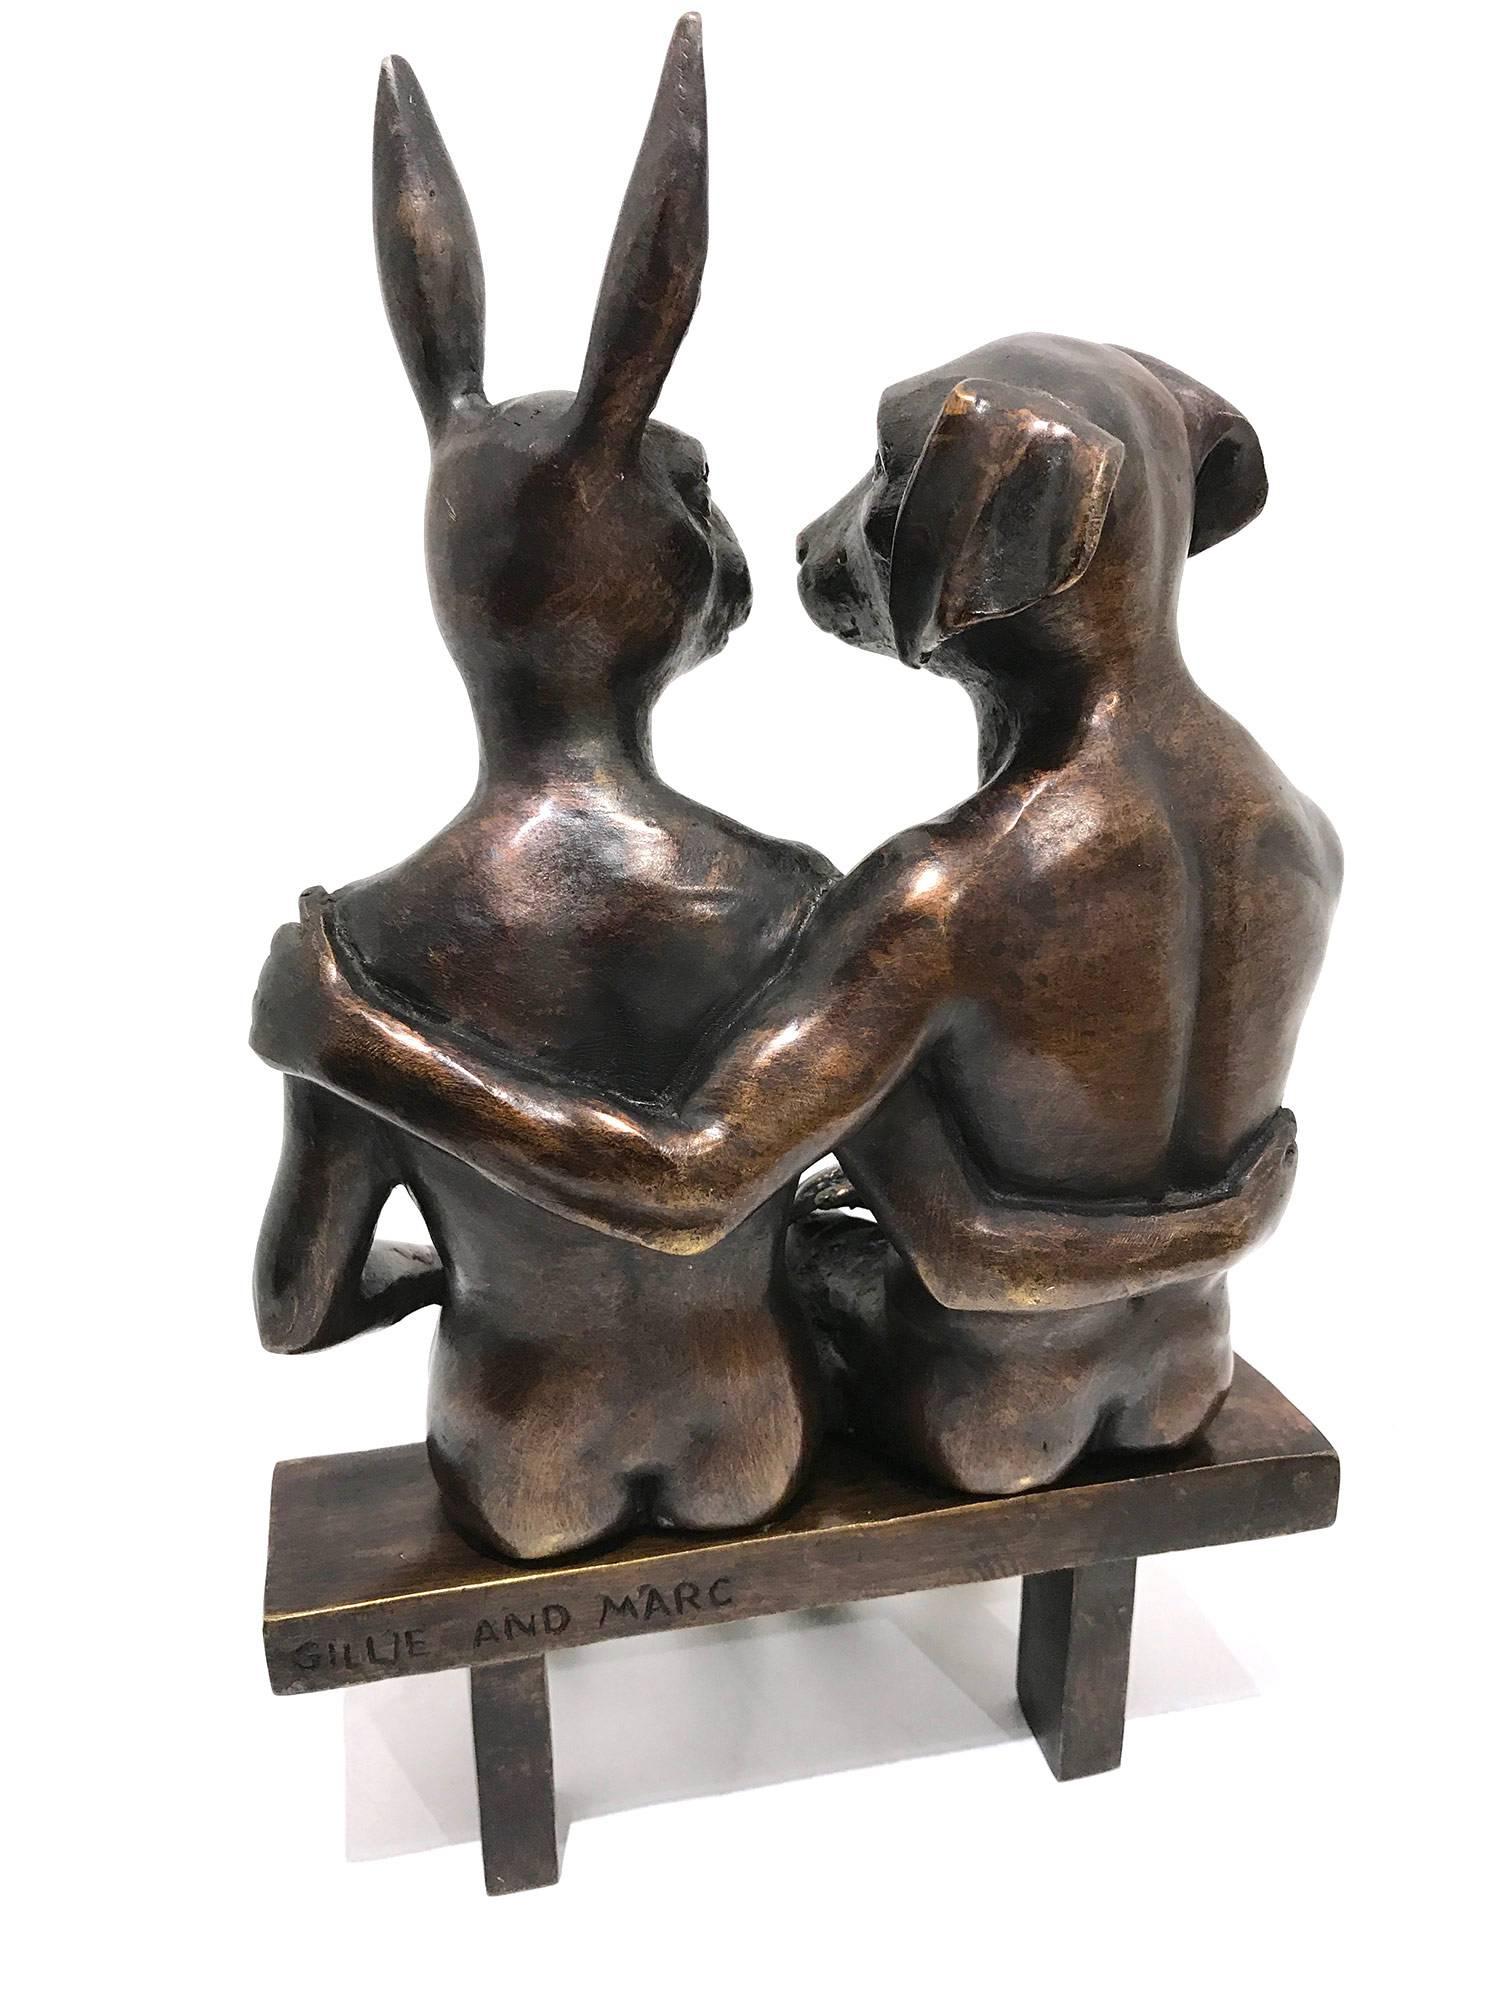 They Were Together Forever - Gold Abstract Sculpture by Gillie and Marc Schattner